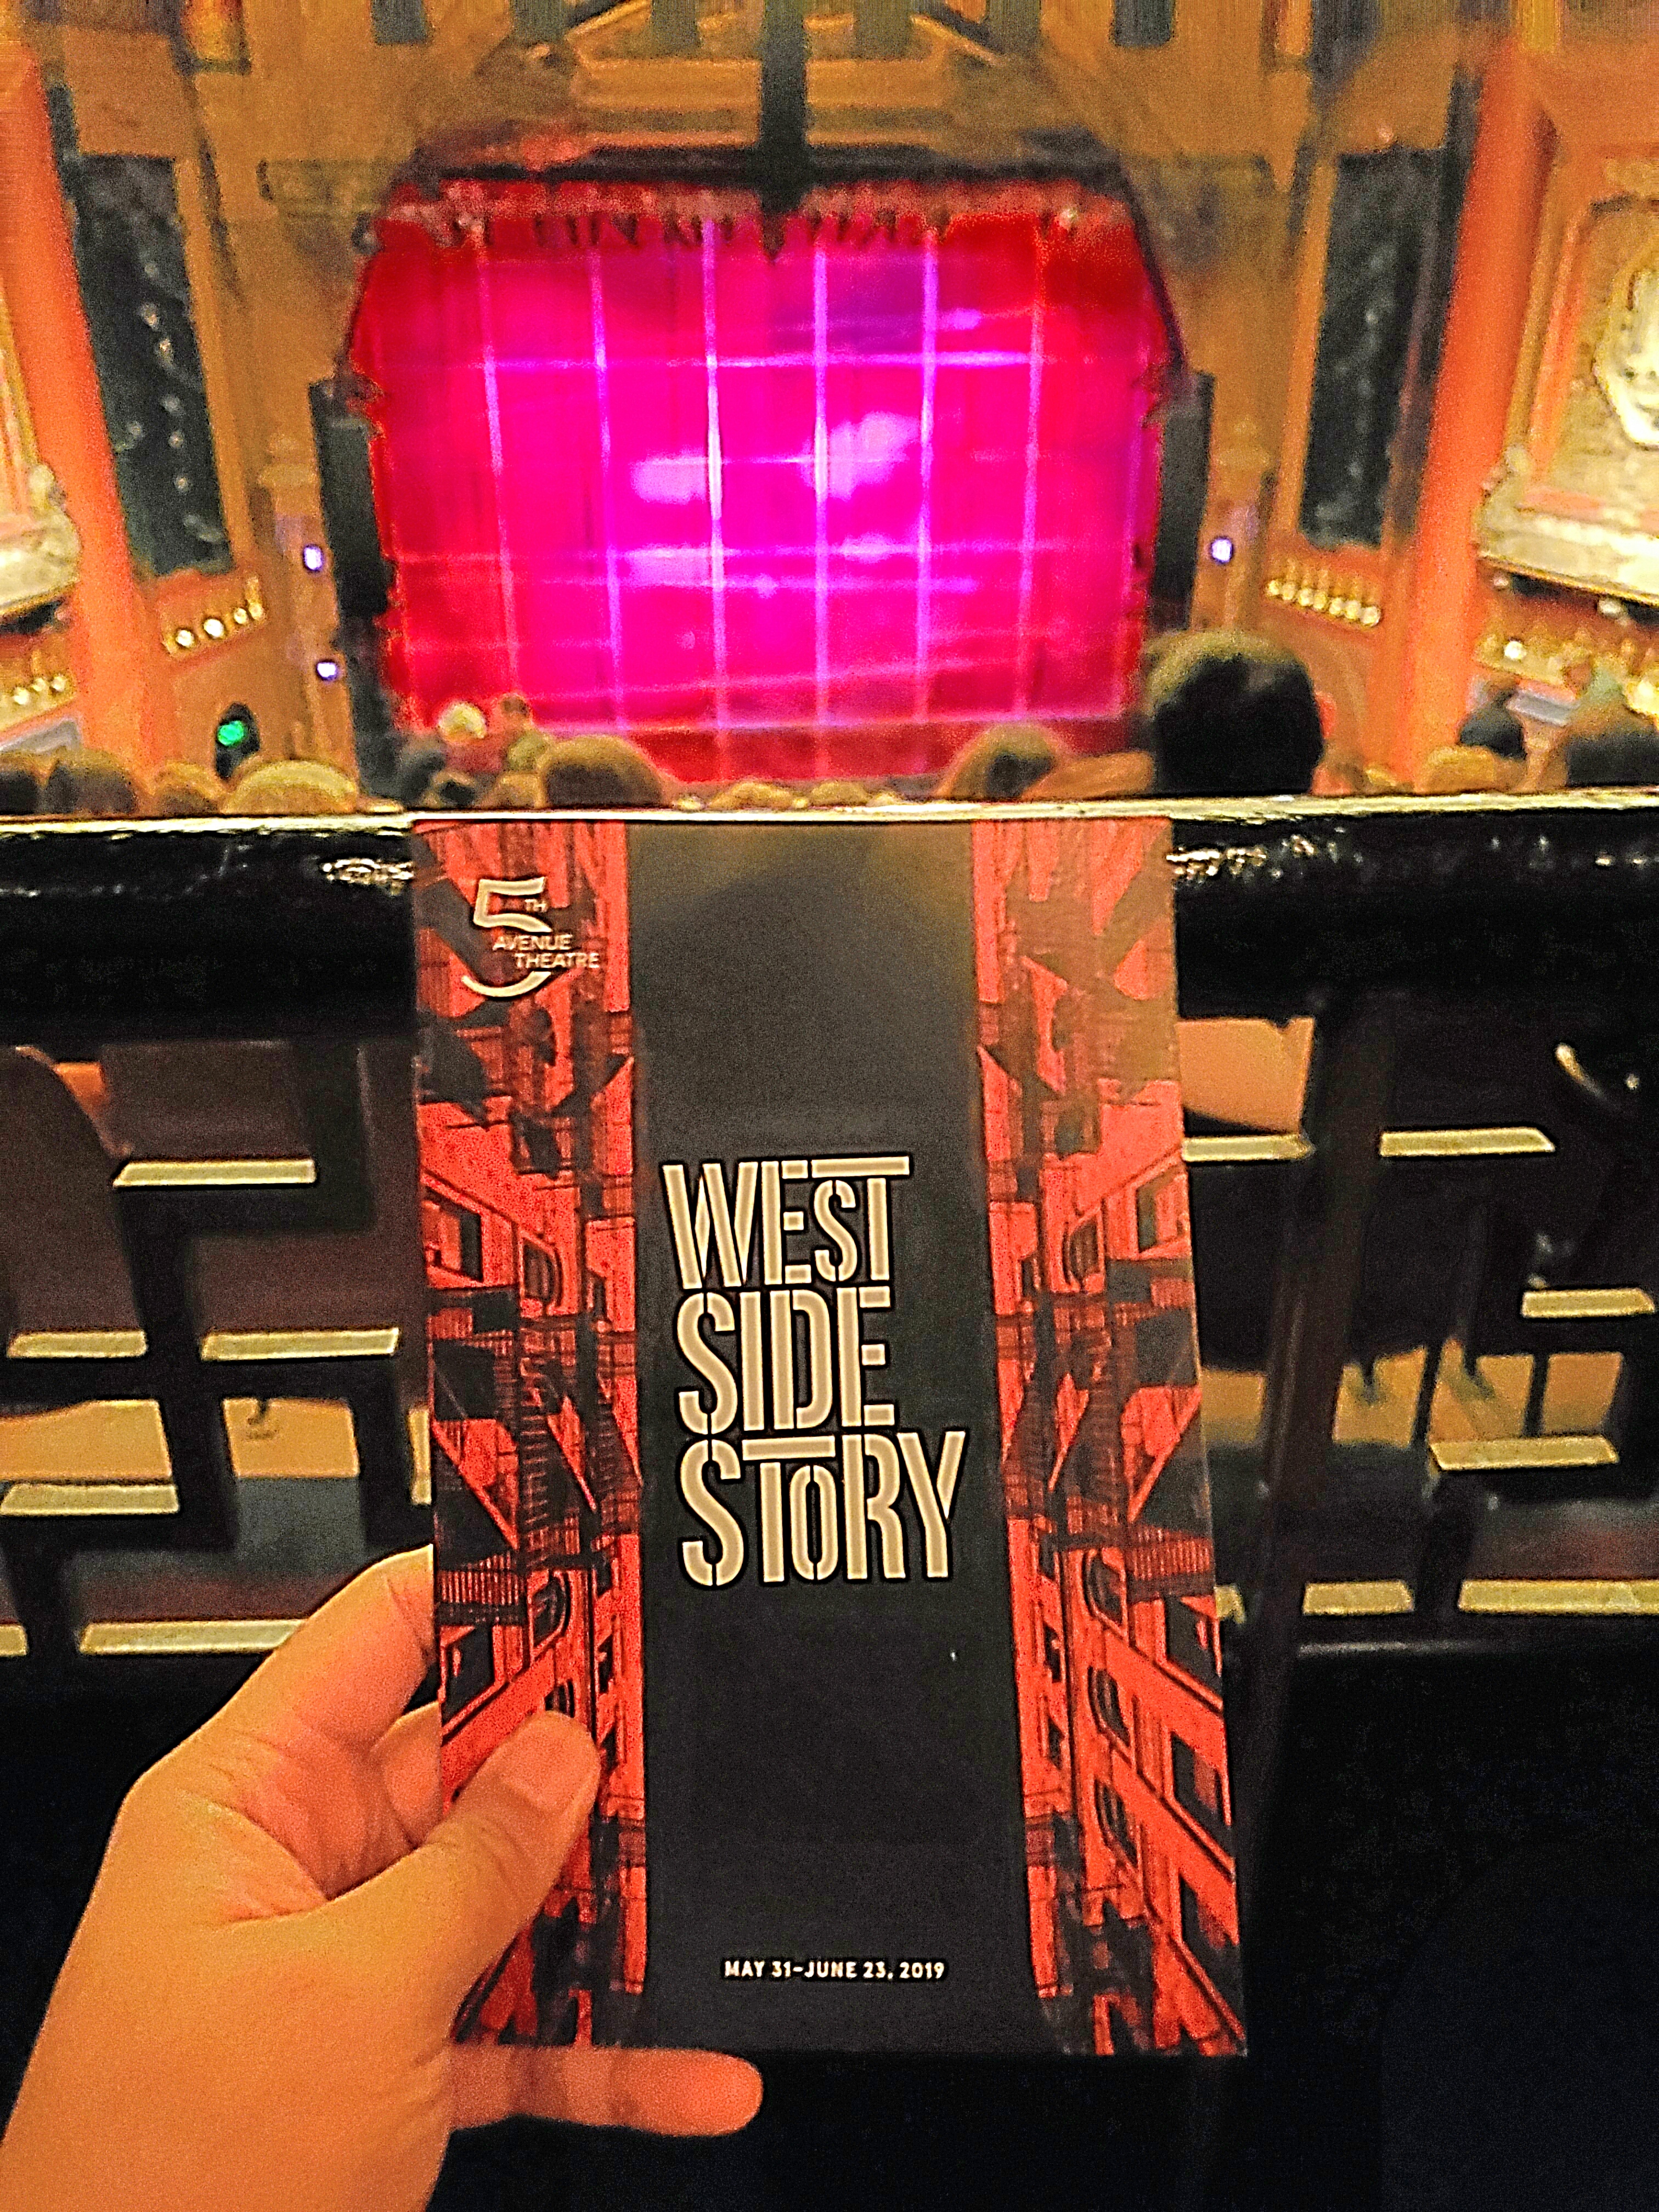 West Side Story #musical w/ Raymund at The 5th Avenue Theatre. Rich male lead voice. #Iconic songs. Beautiful orchestration. Strong #choreography but comical for tough #gangs to 